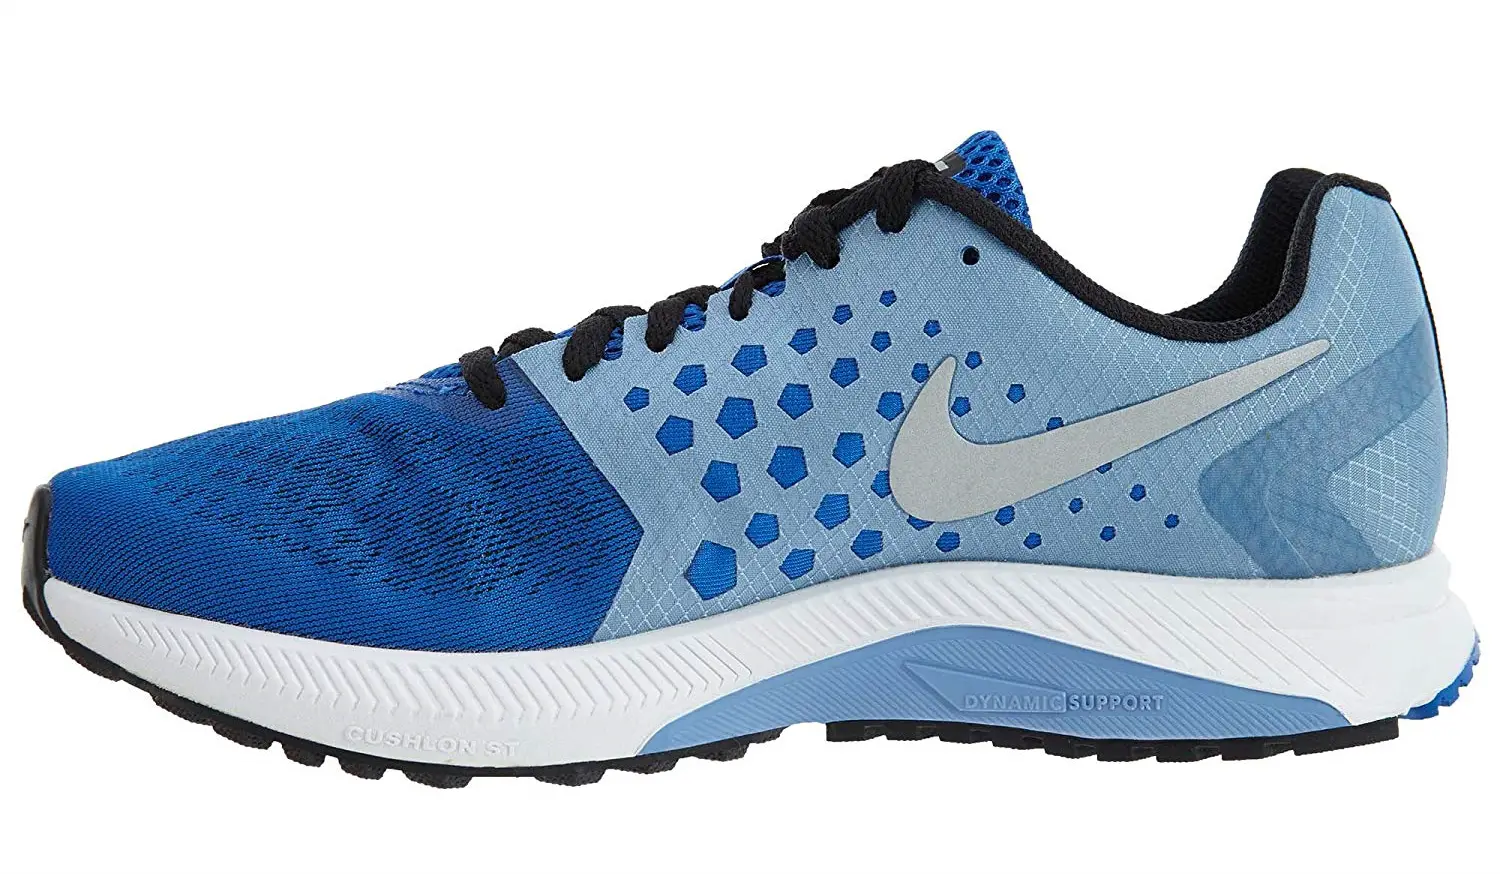 Best Nike Stability Running Shoes 